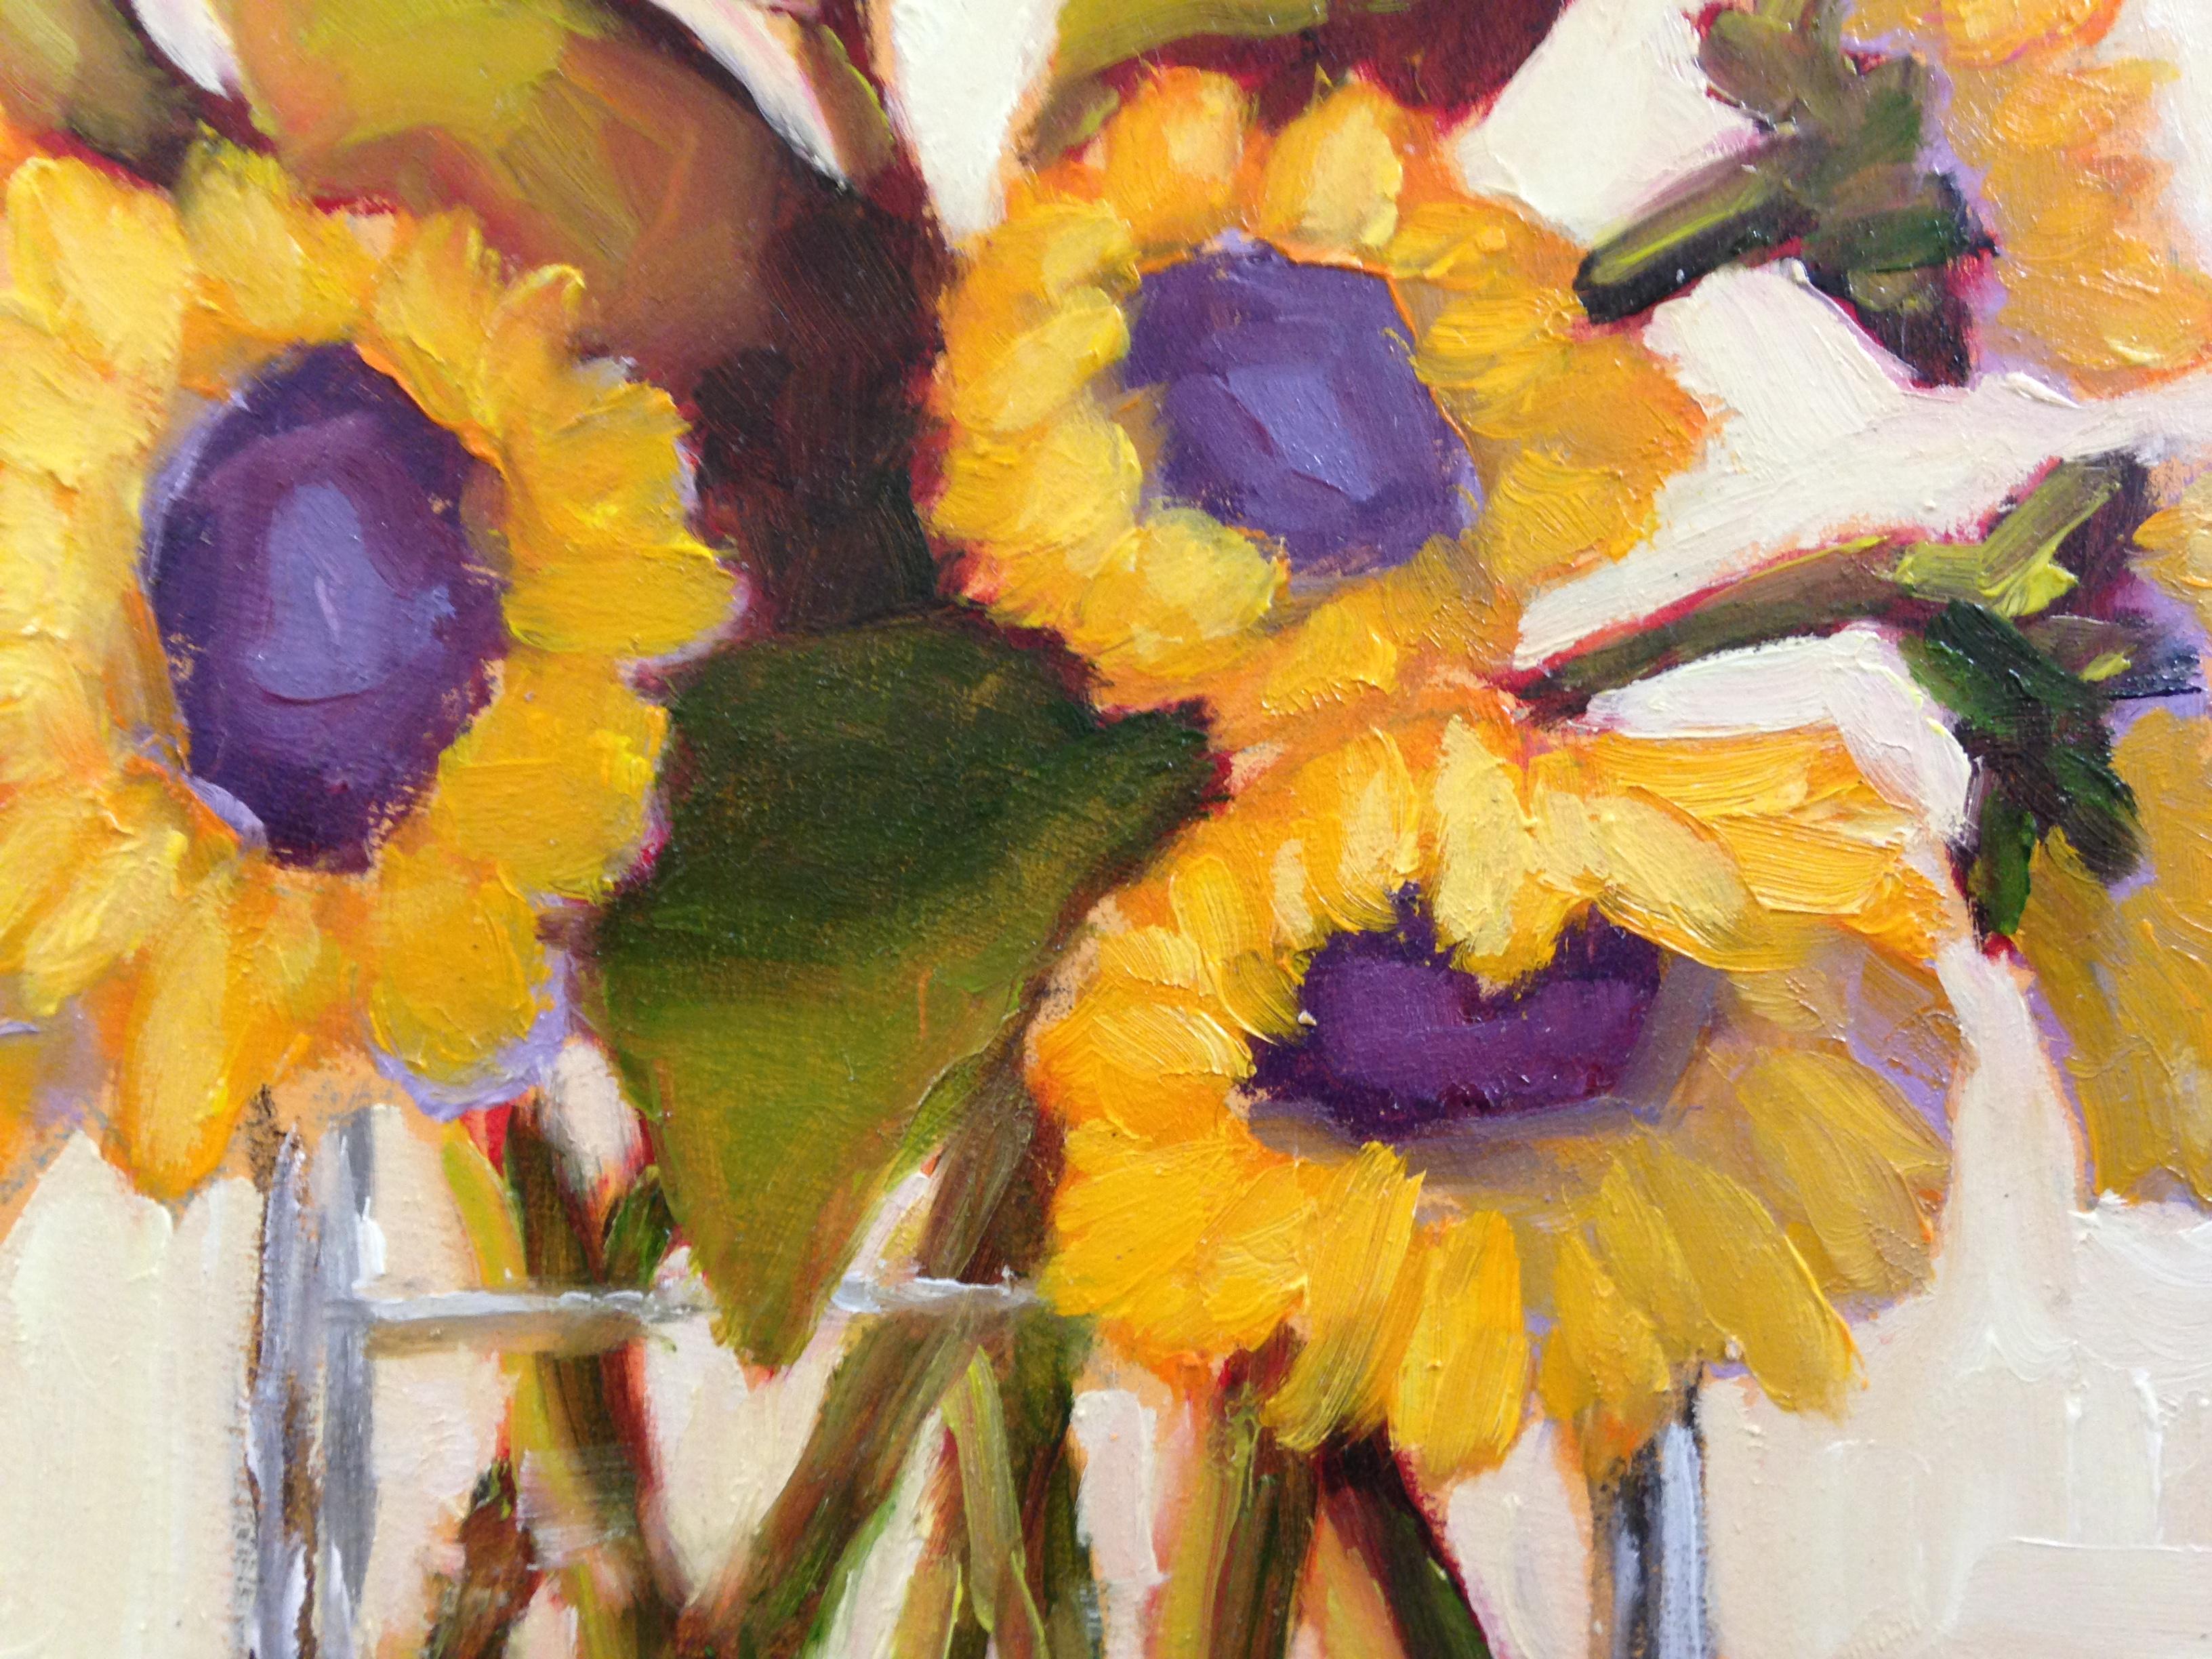 painting of sunflowers in vase